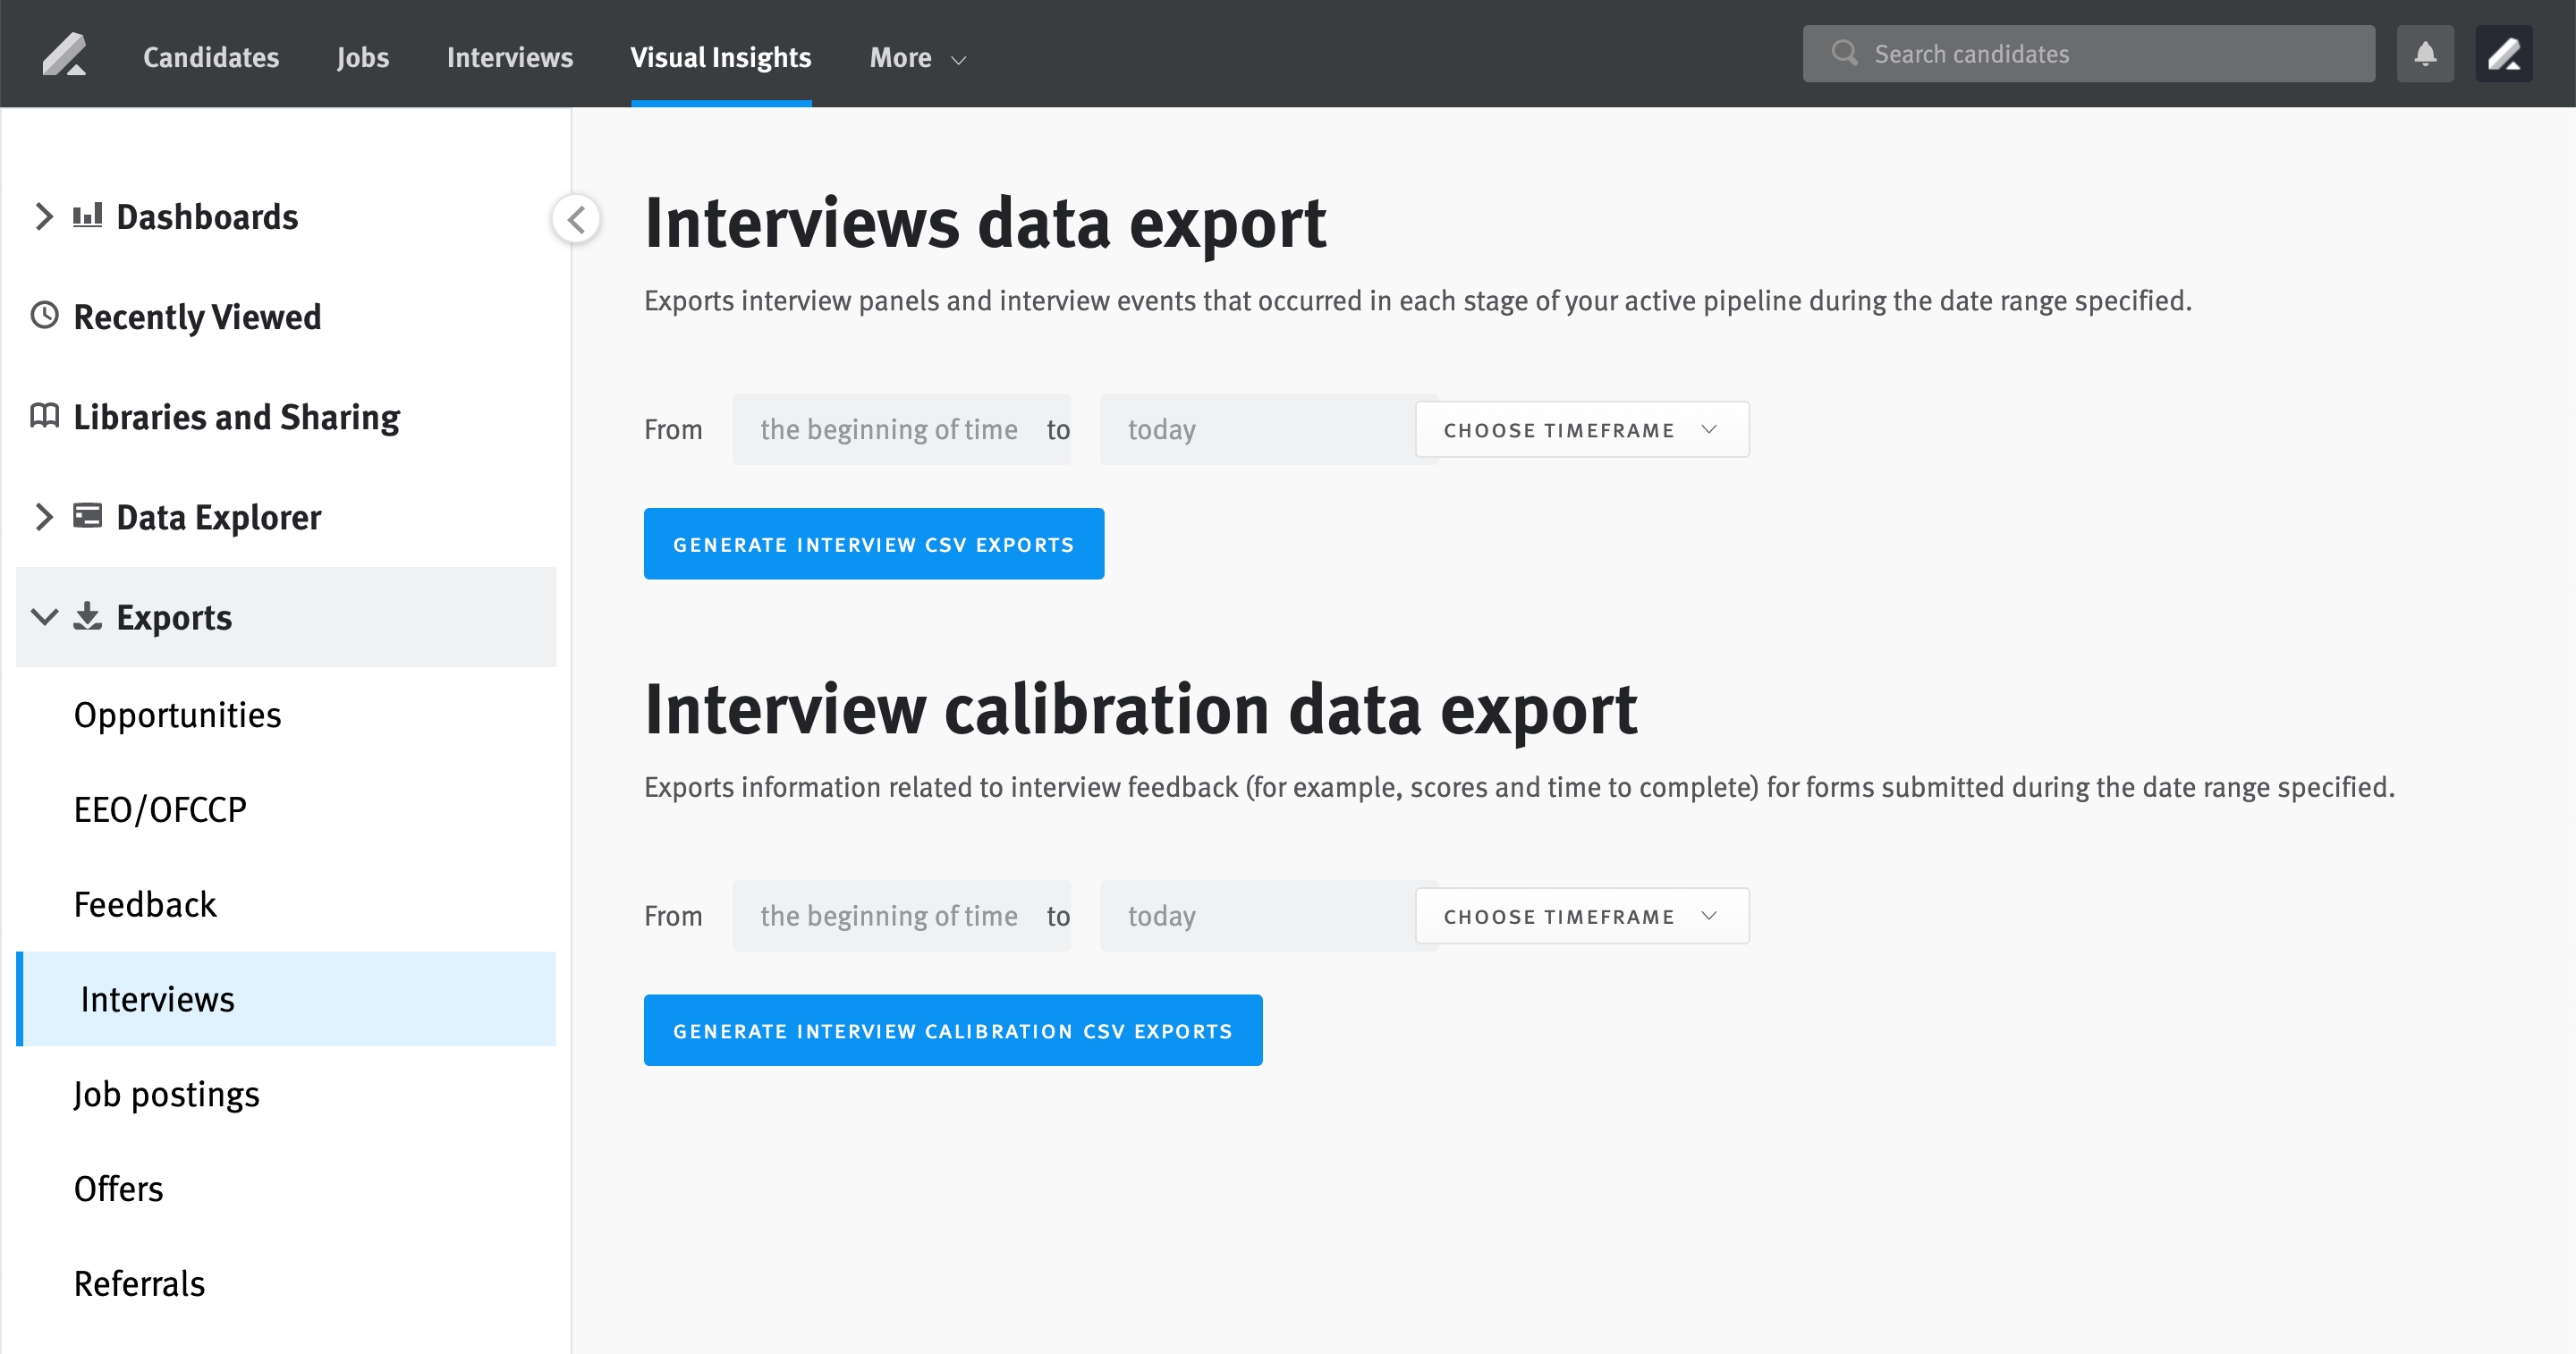 Exports page in Visual Insights with navigation menu expanded and Exports option highlighted on hover